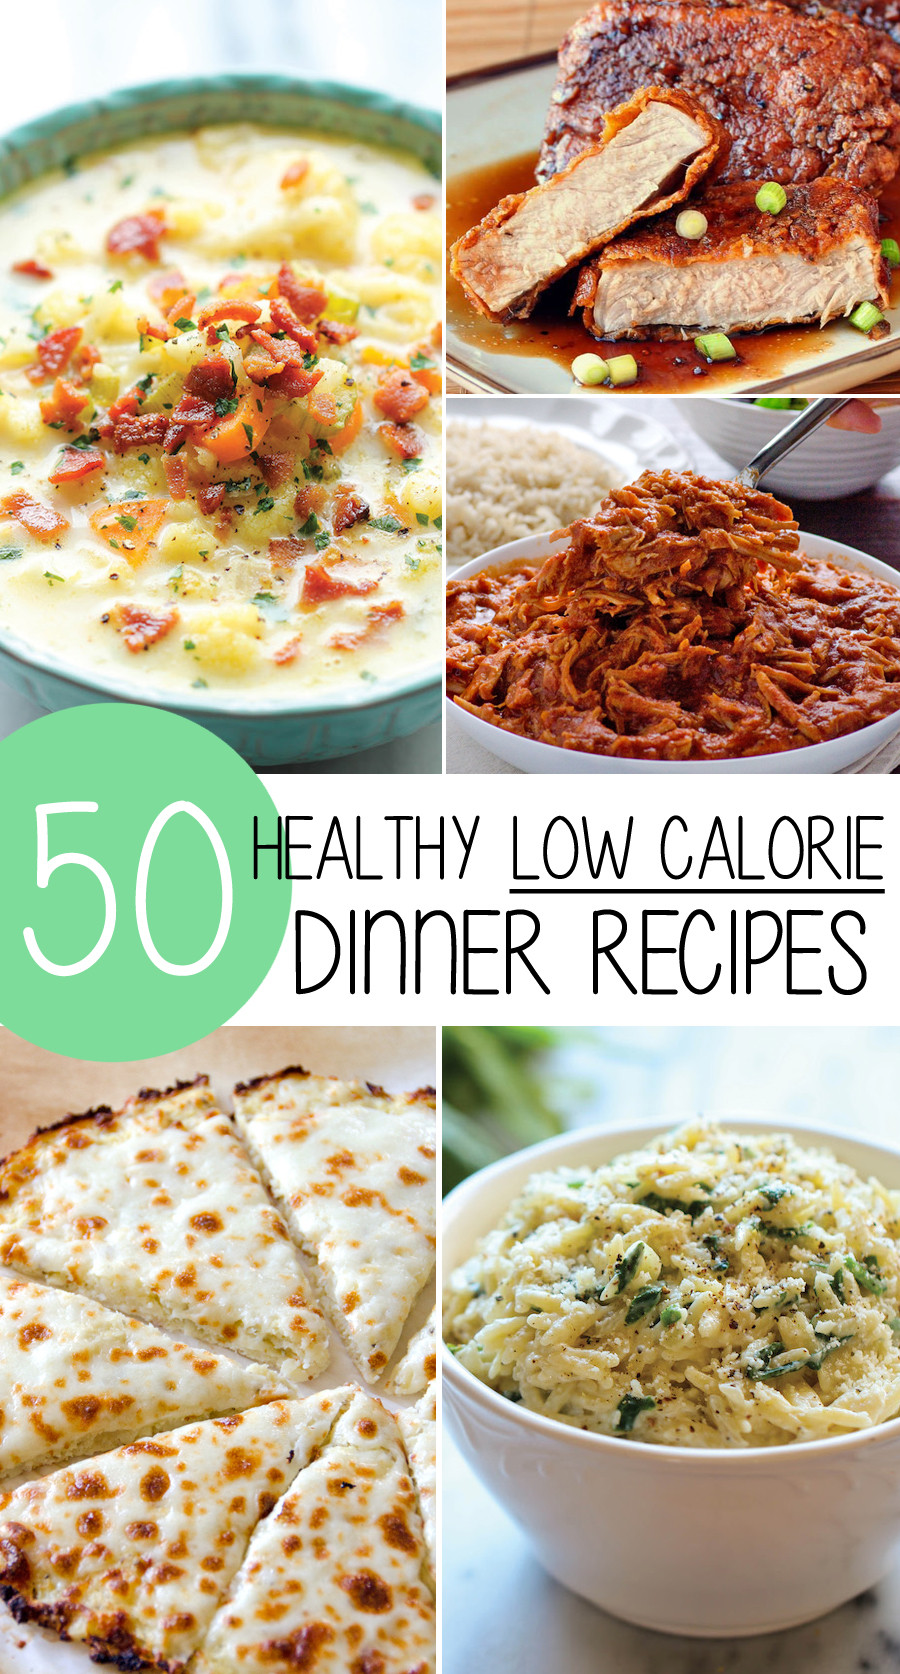 Healthy Low Calorie Recipes 20 Ideas for 50 Healthy Low Calorie Weight Loss Dinner Recipes